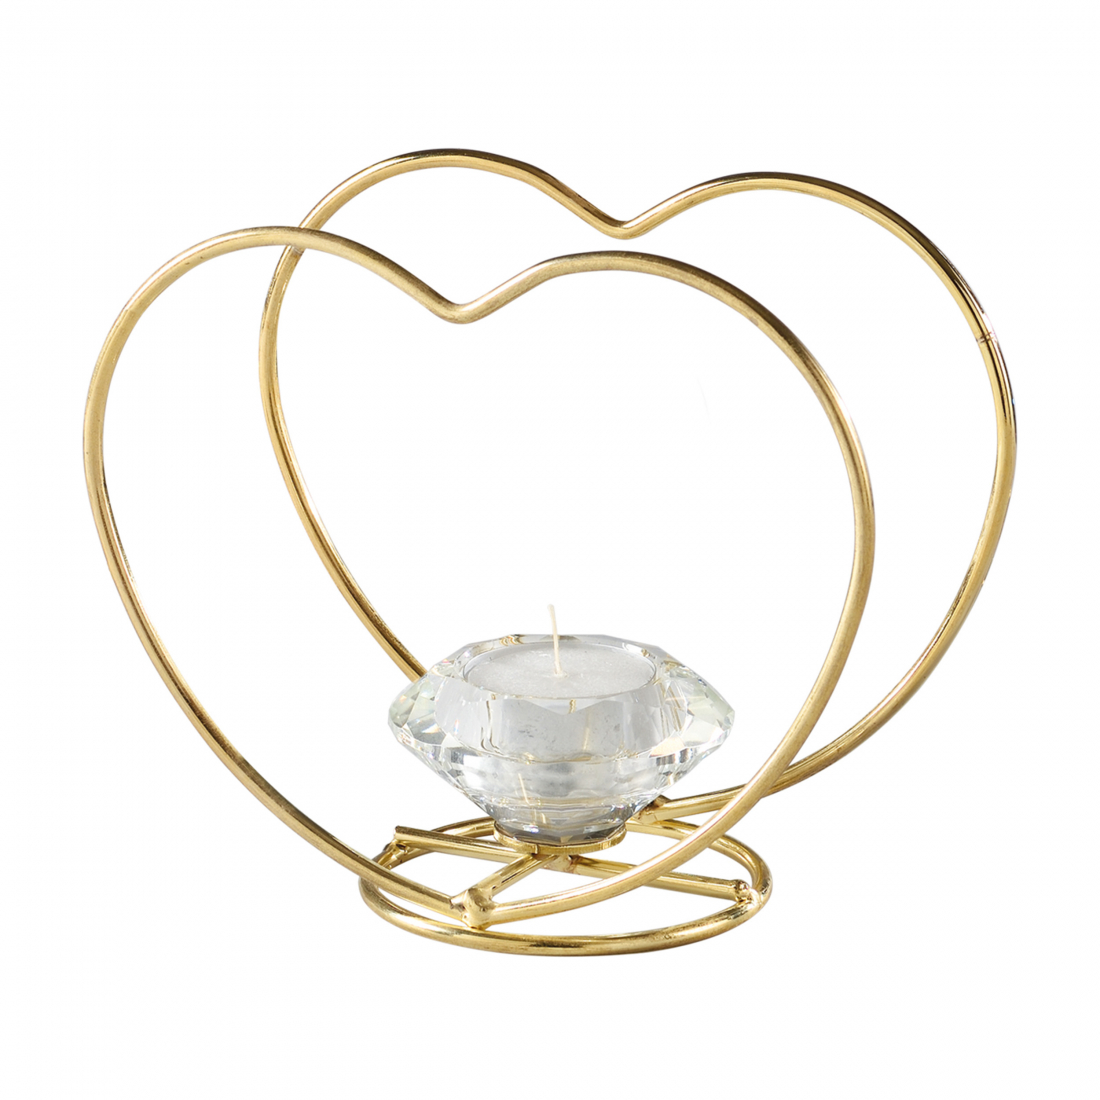 'Heart' Candle Holder